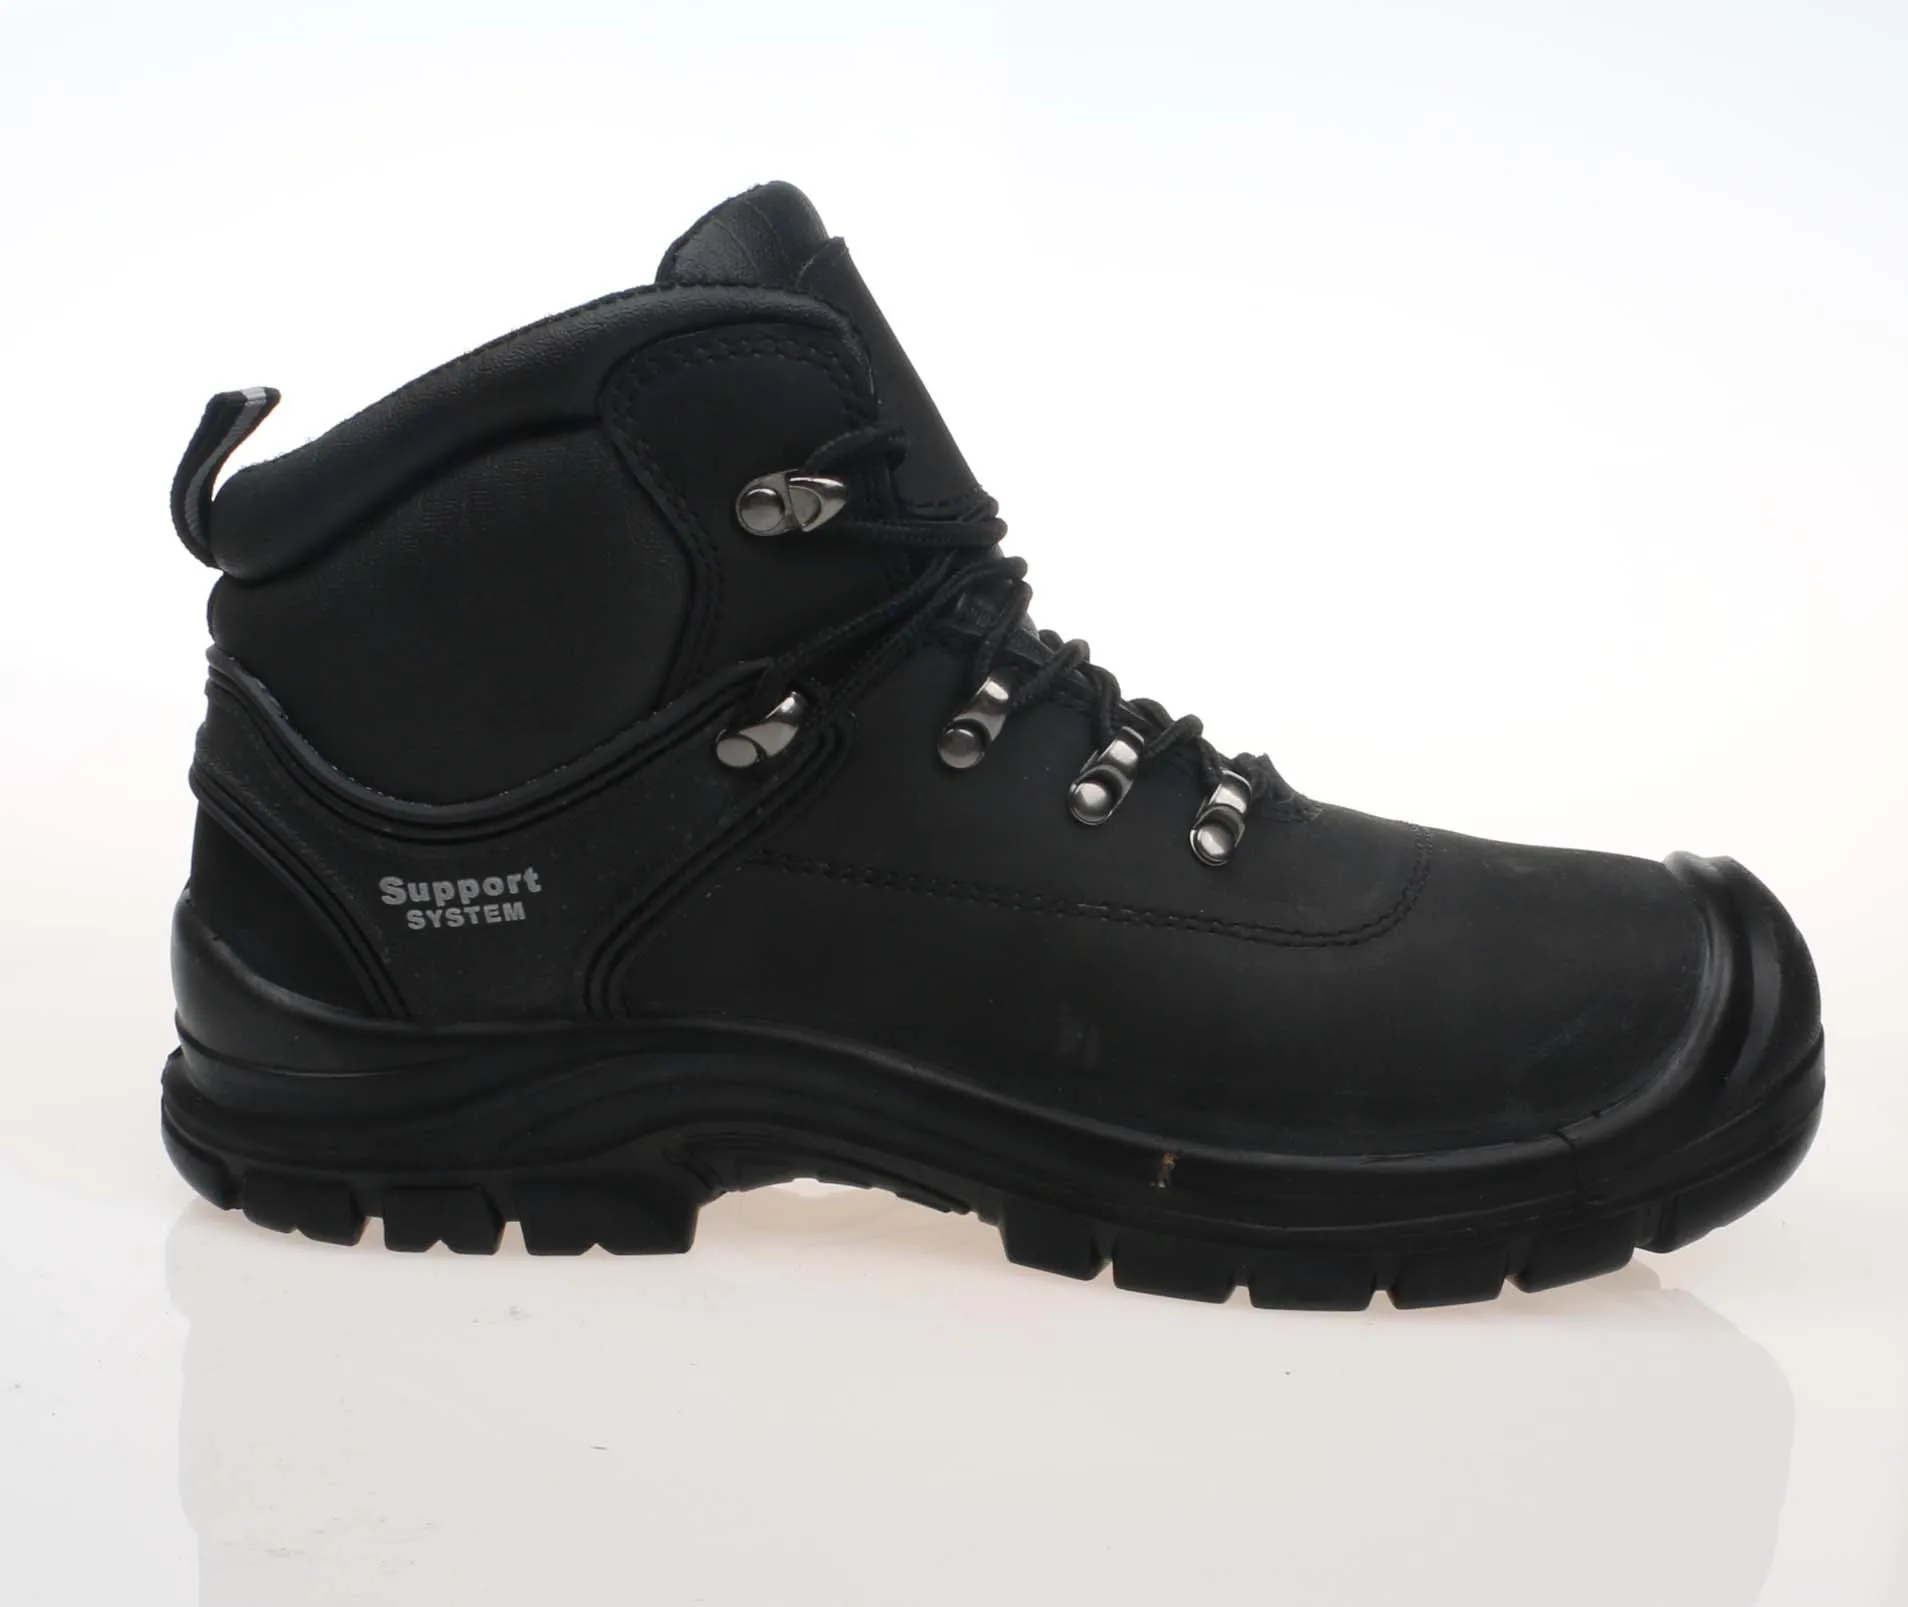 
work supplier working shoes security rubber sole army dms boots waterproof toe protector leather safety shoes in germany 